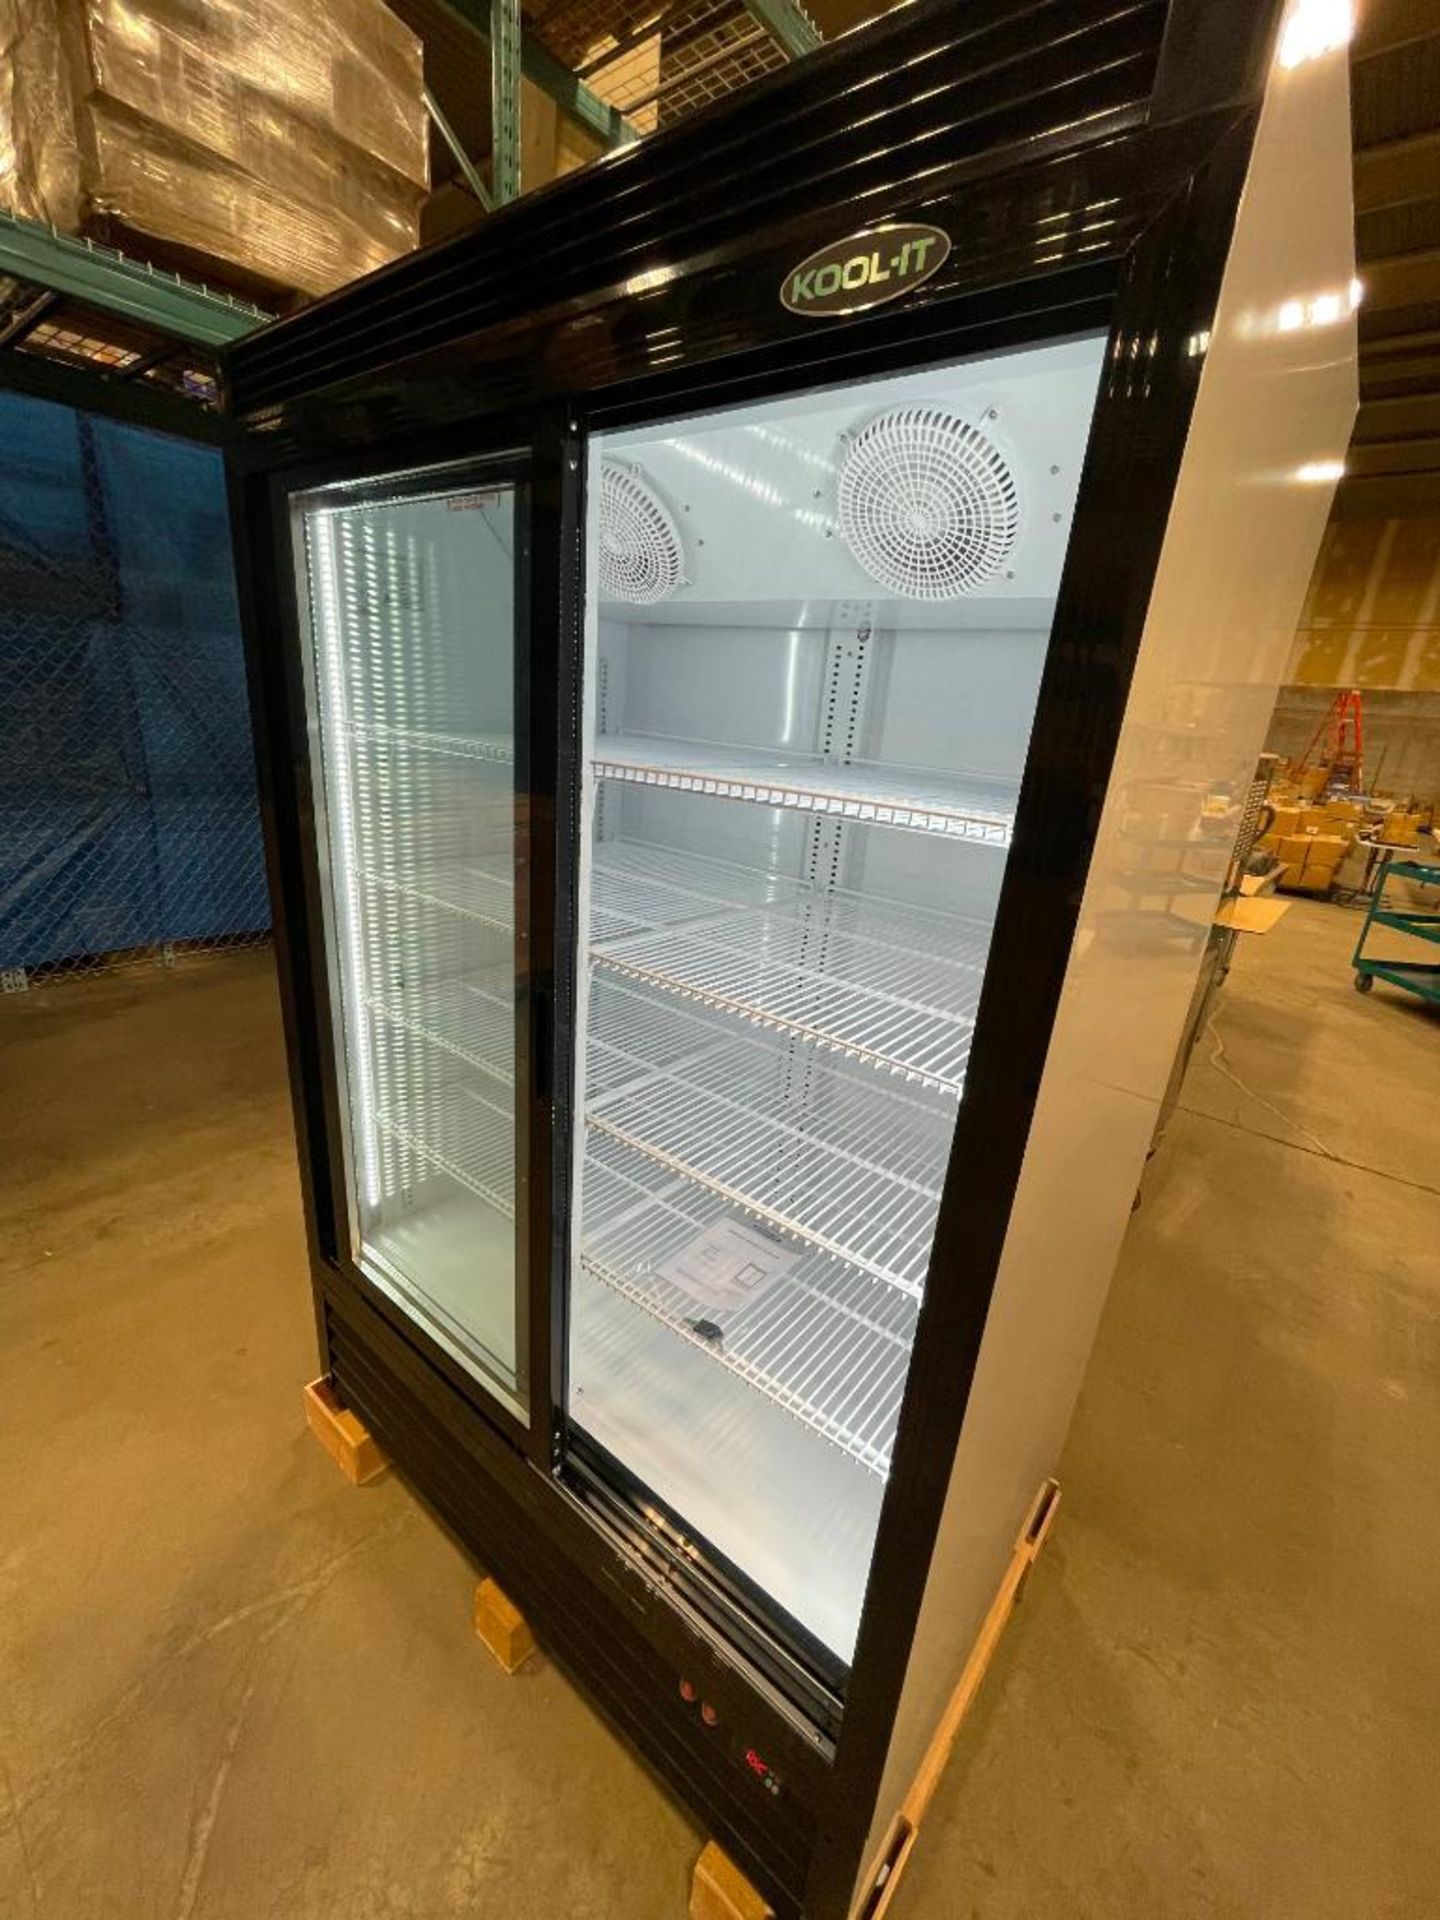 DOUBLE SLIDING GLASS DOOR COOLER, 33.5 CU. FT, LED DISPLAY - NEW - Image 3 of 13